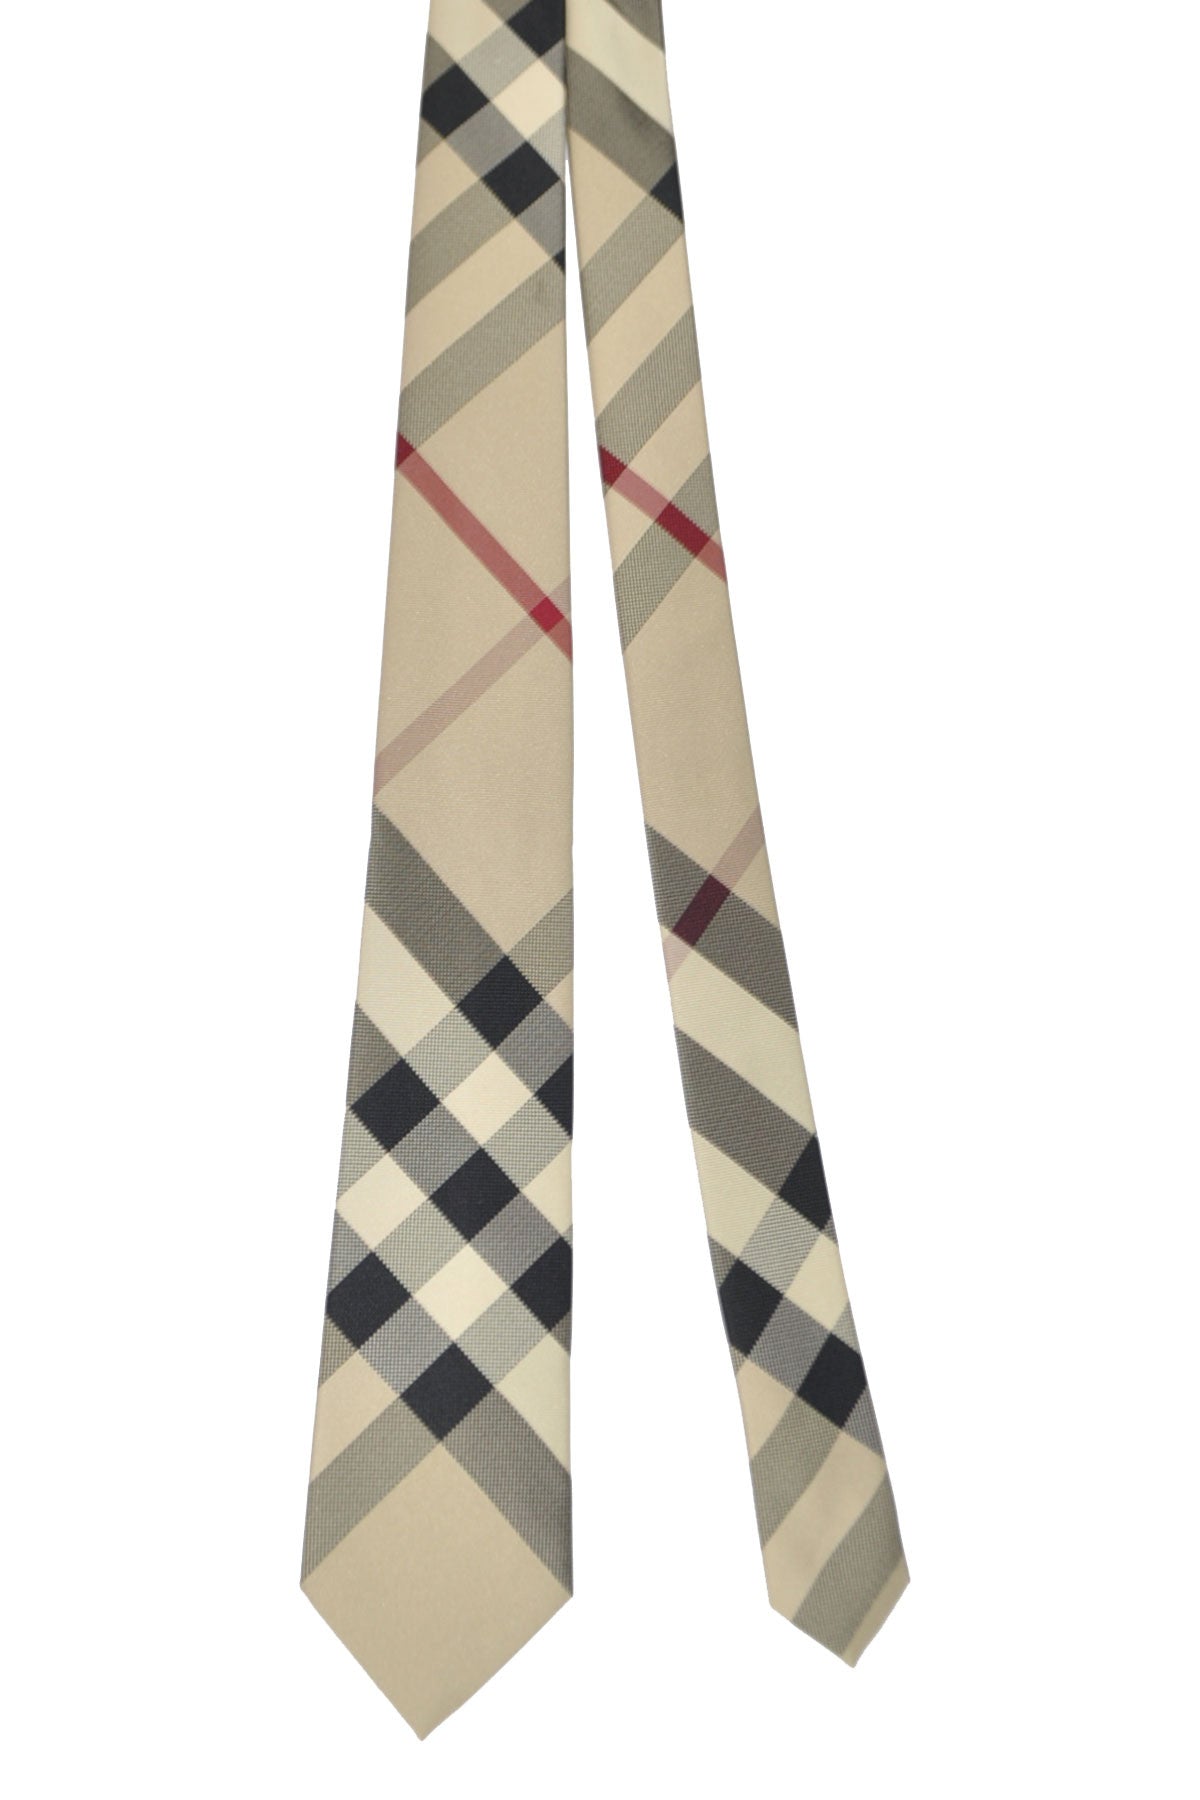 Burberry Check Ties - Bestsellers At 30% Off